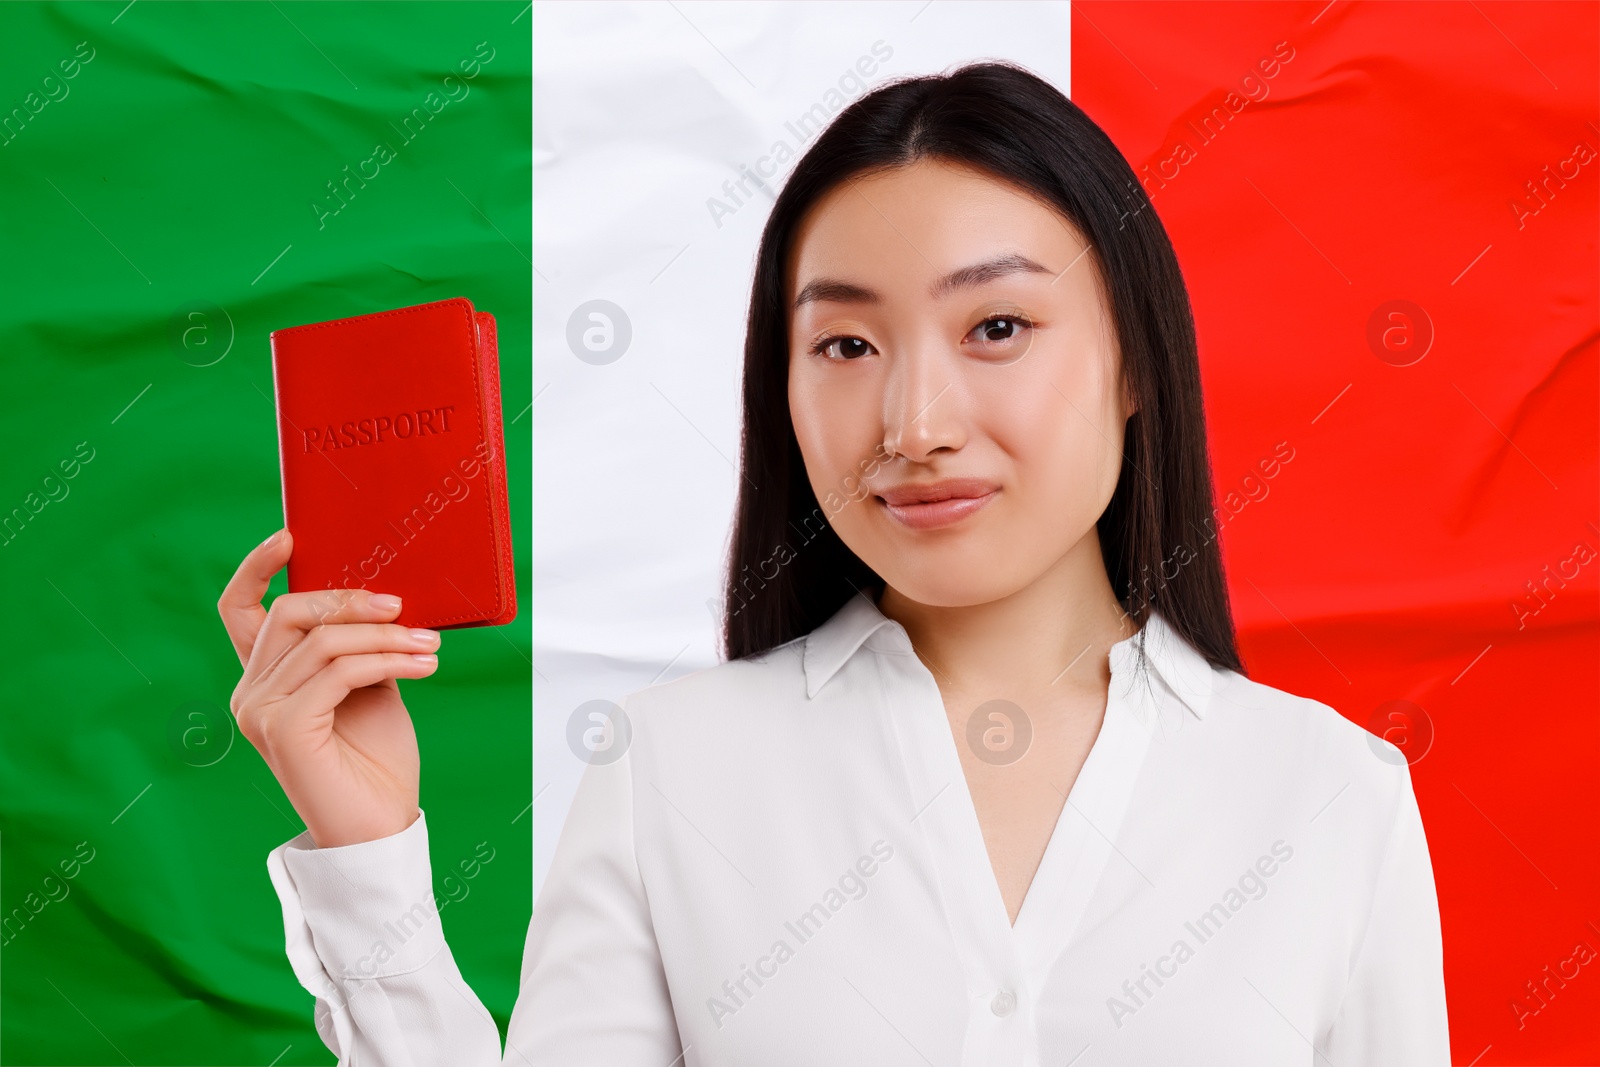 Image of Immigration. Woman with passport against national flag of Italy